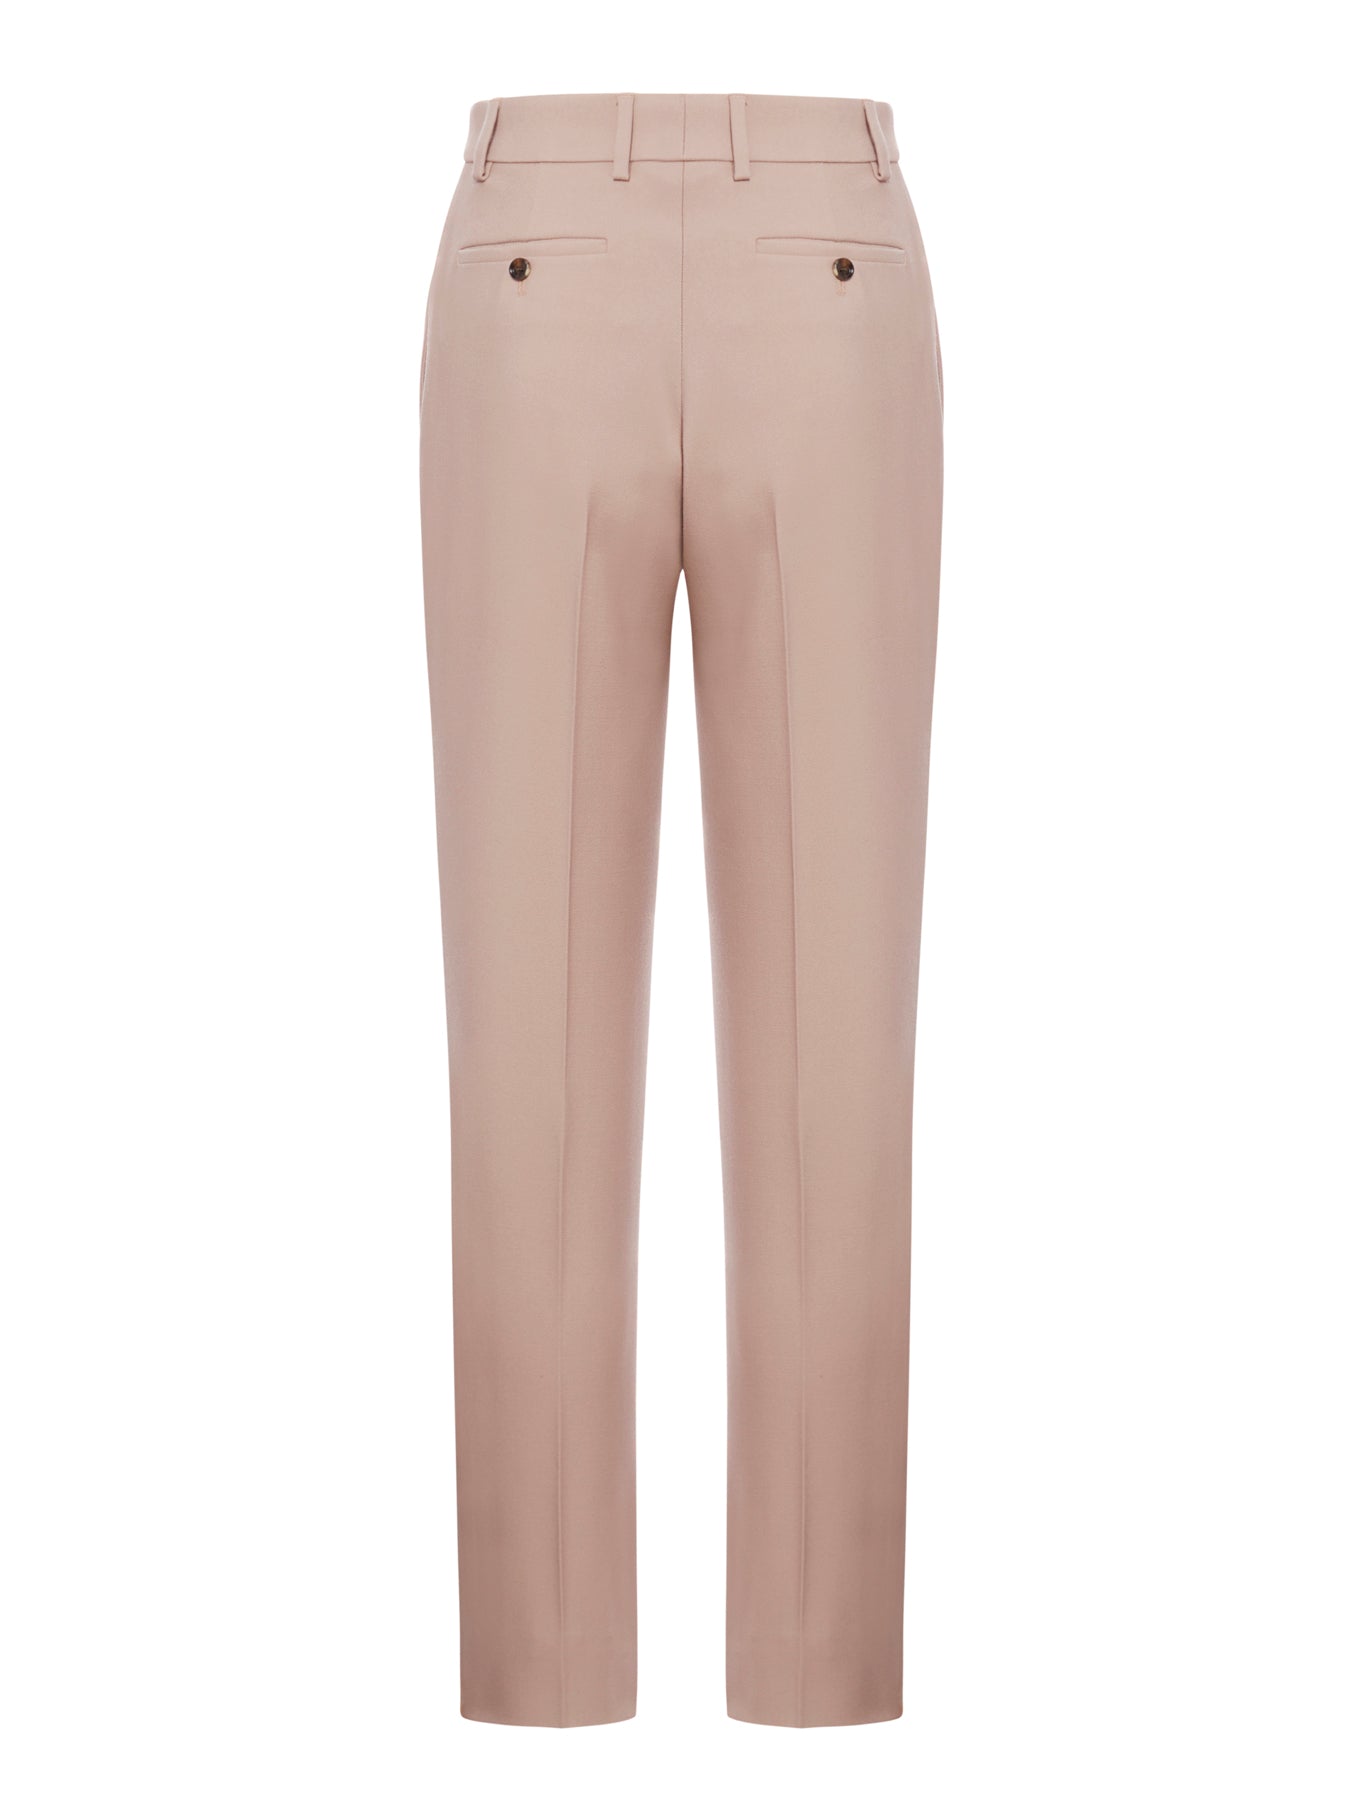 TROUSERS WITH GUCCI BIT LABEL